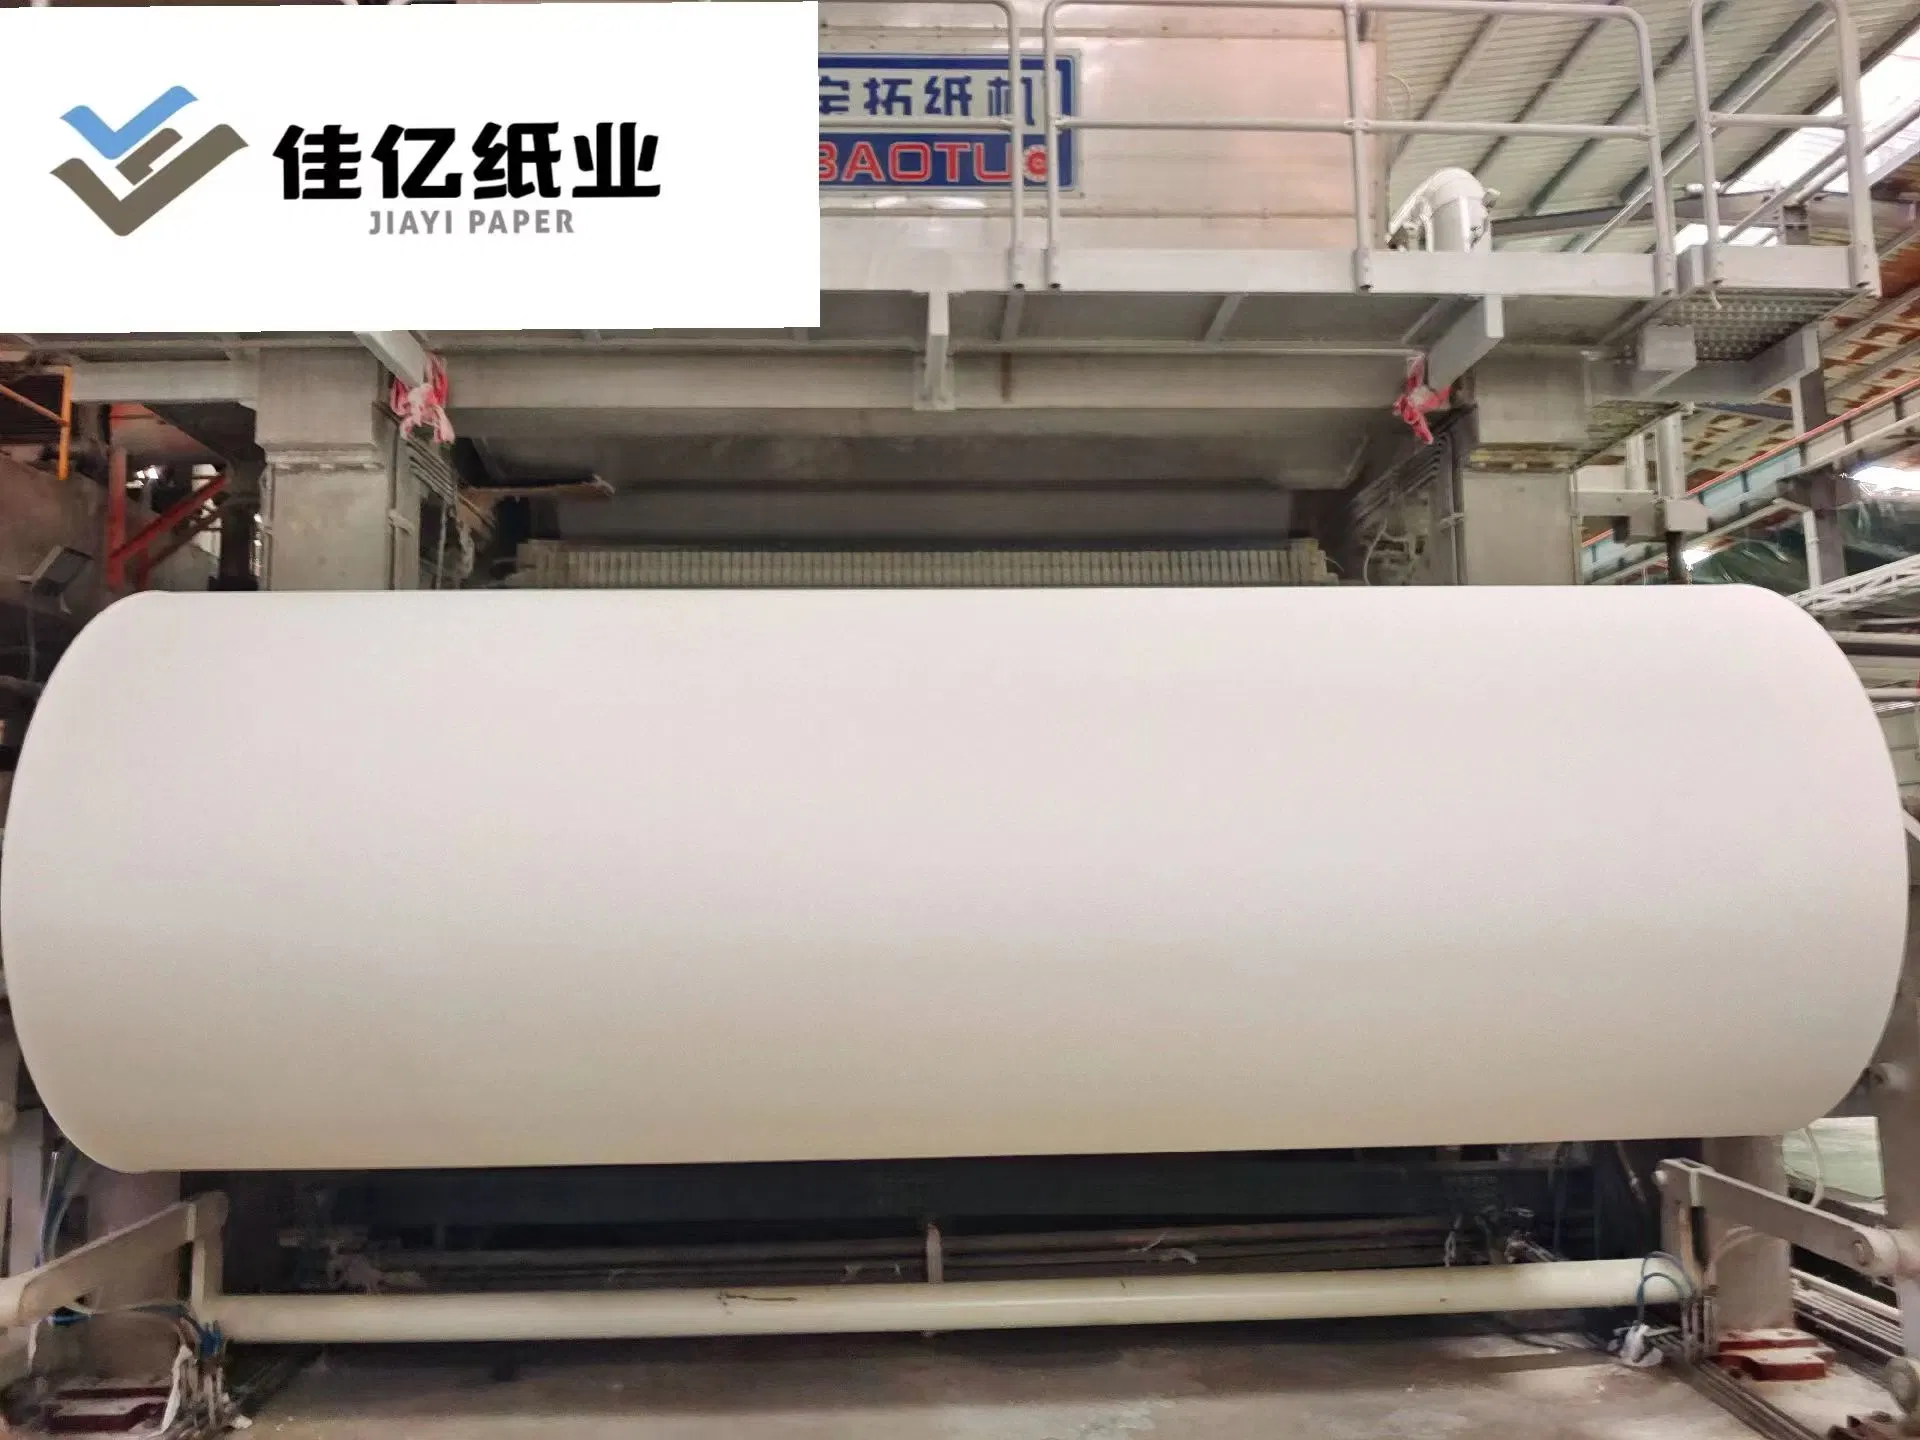 Super Large Tissue Roll for Material of Napkin Facial Tissue Toilet Paper Facial Tissue